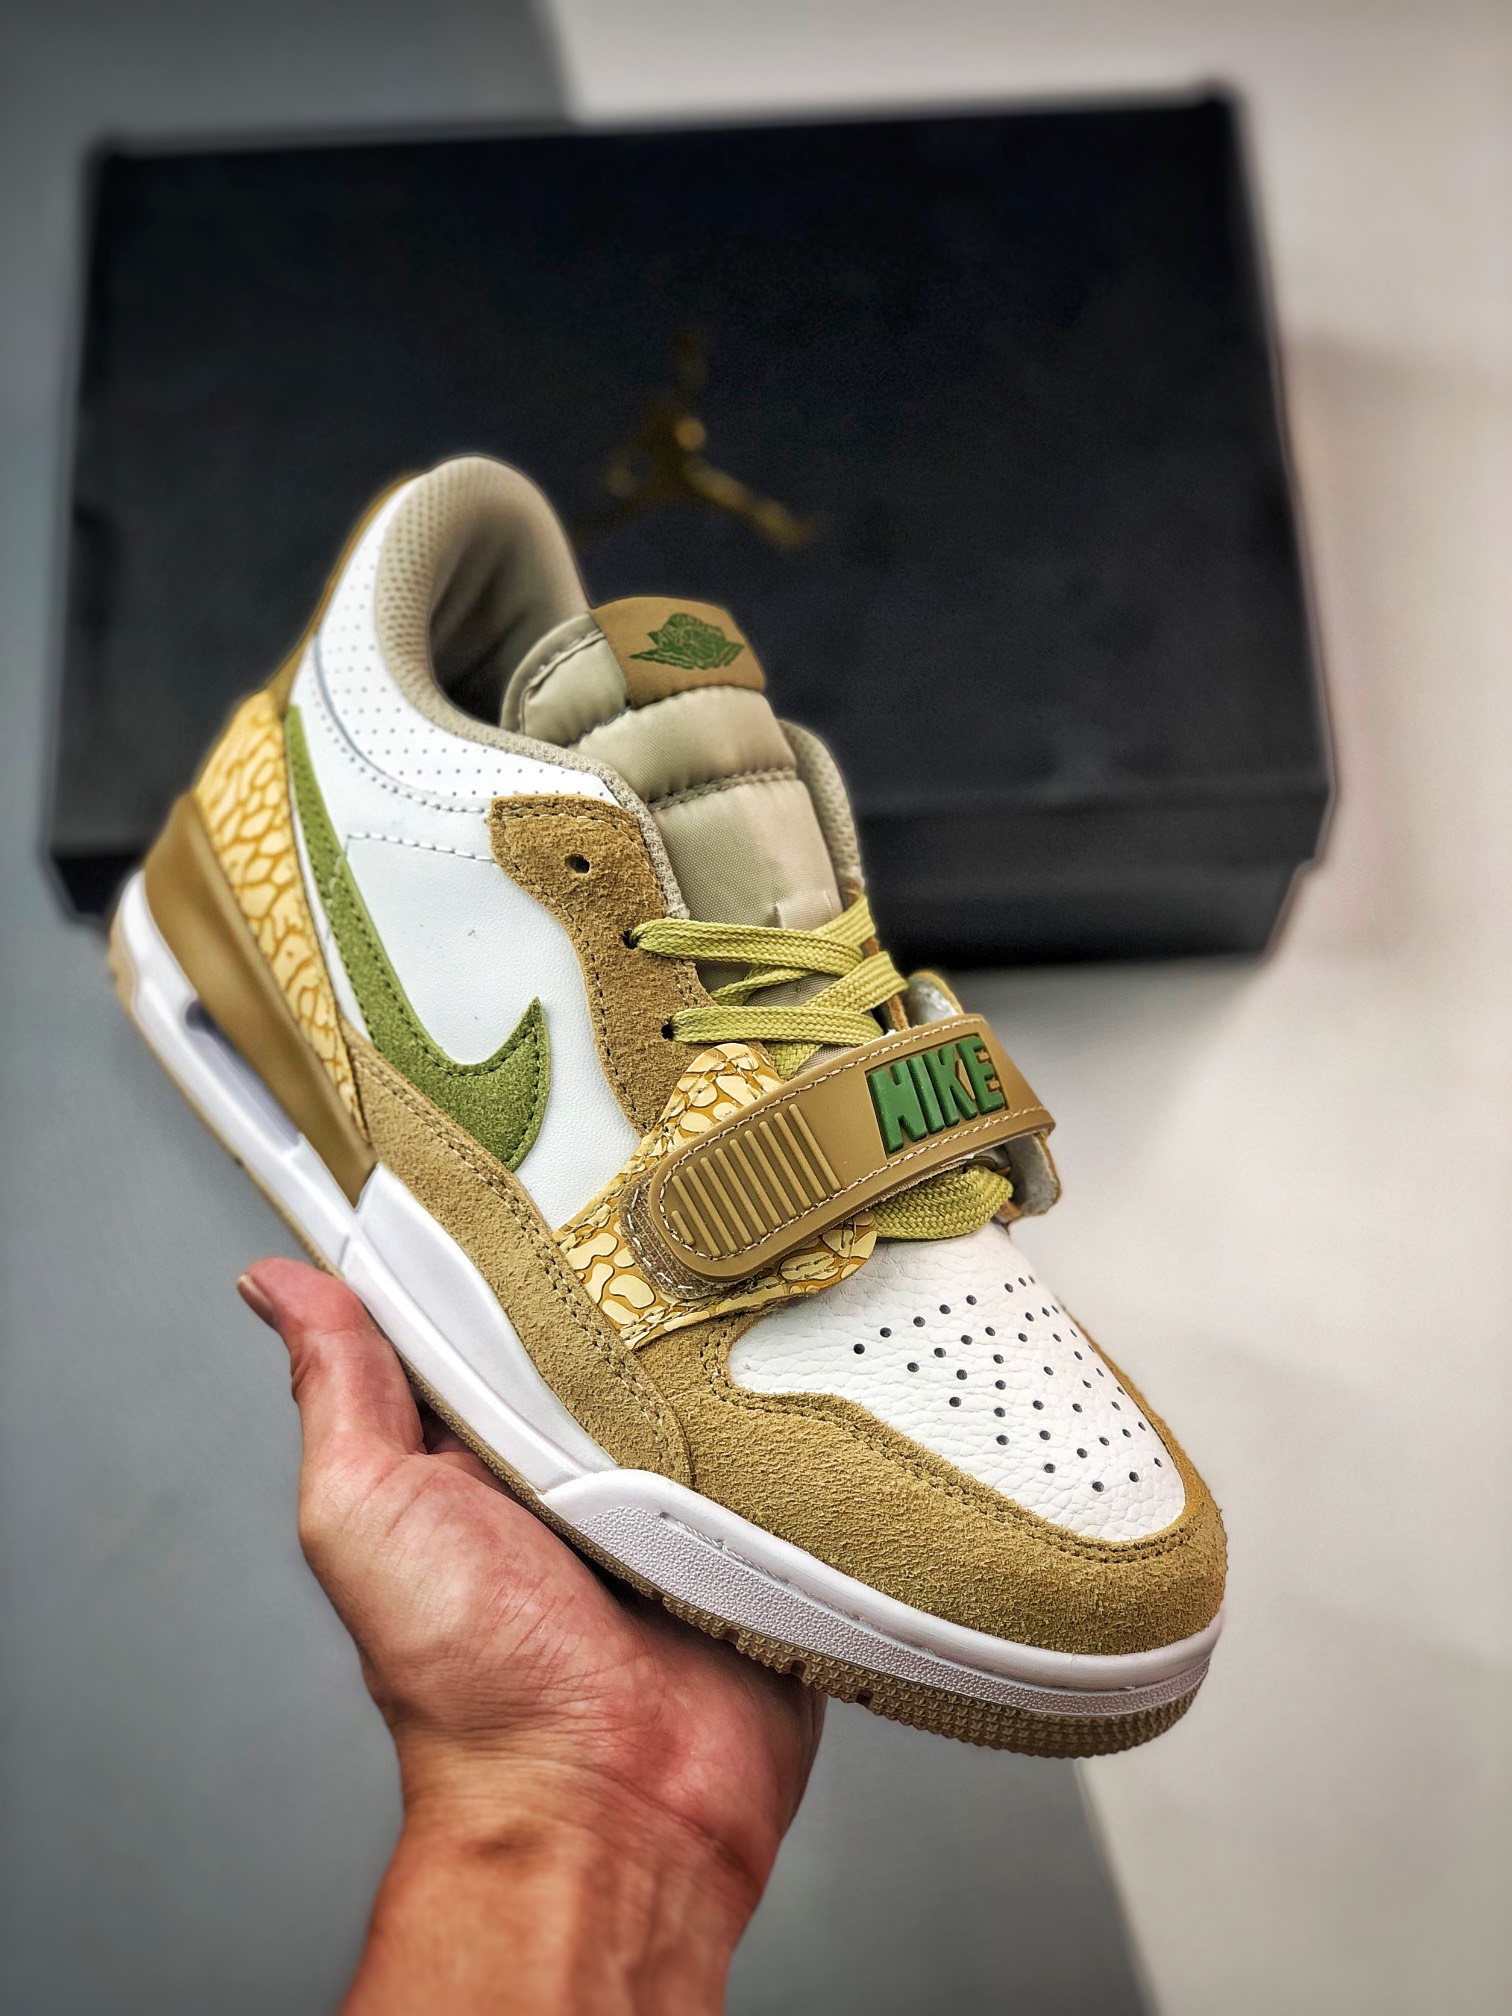 Jordan Legacy 312 Low Olive and Gold Tones DX9260-001 Shoes